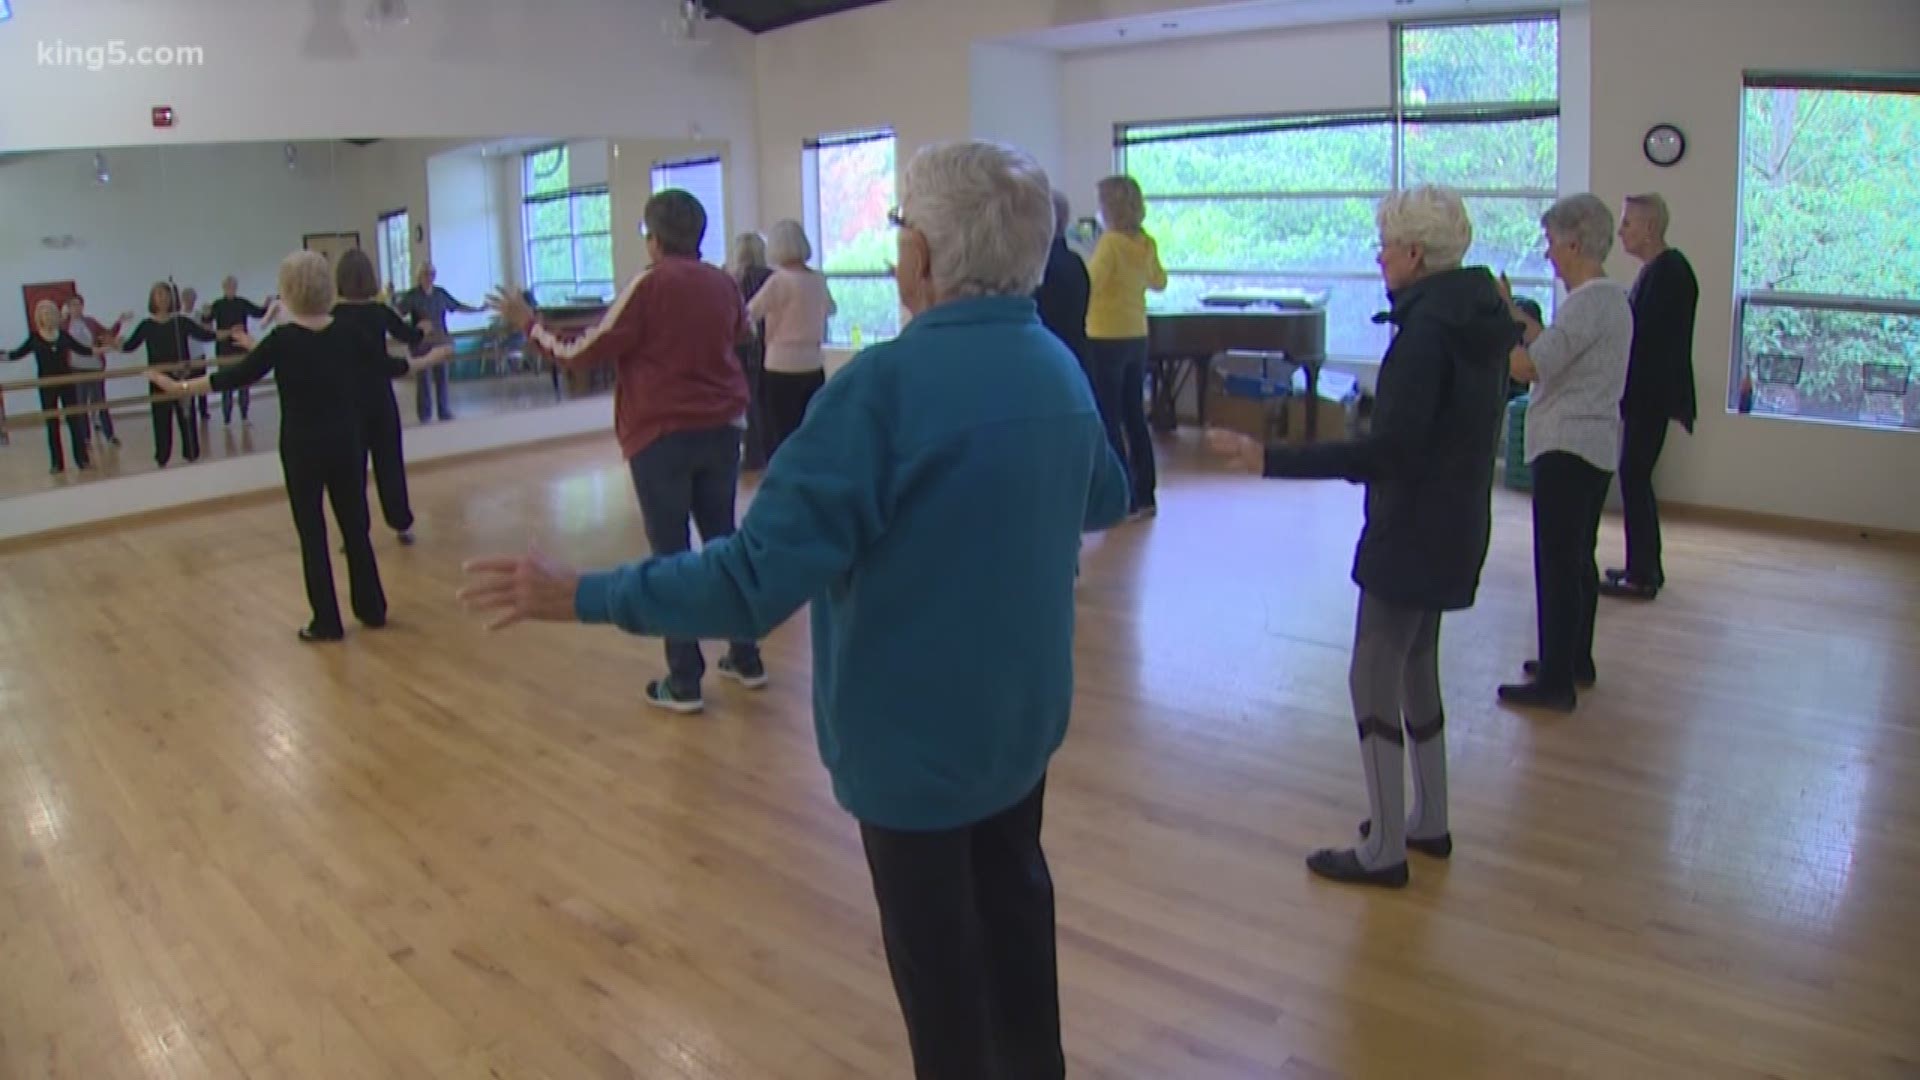 After a decade run, the Senior Club in Gig Harbor is scrambling to find a new location. The building they have operated out of, rent free, has changed ownership, meaning they have until June to find a new home. KING 5's Sebastian Robertson reports.